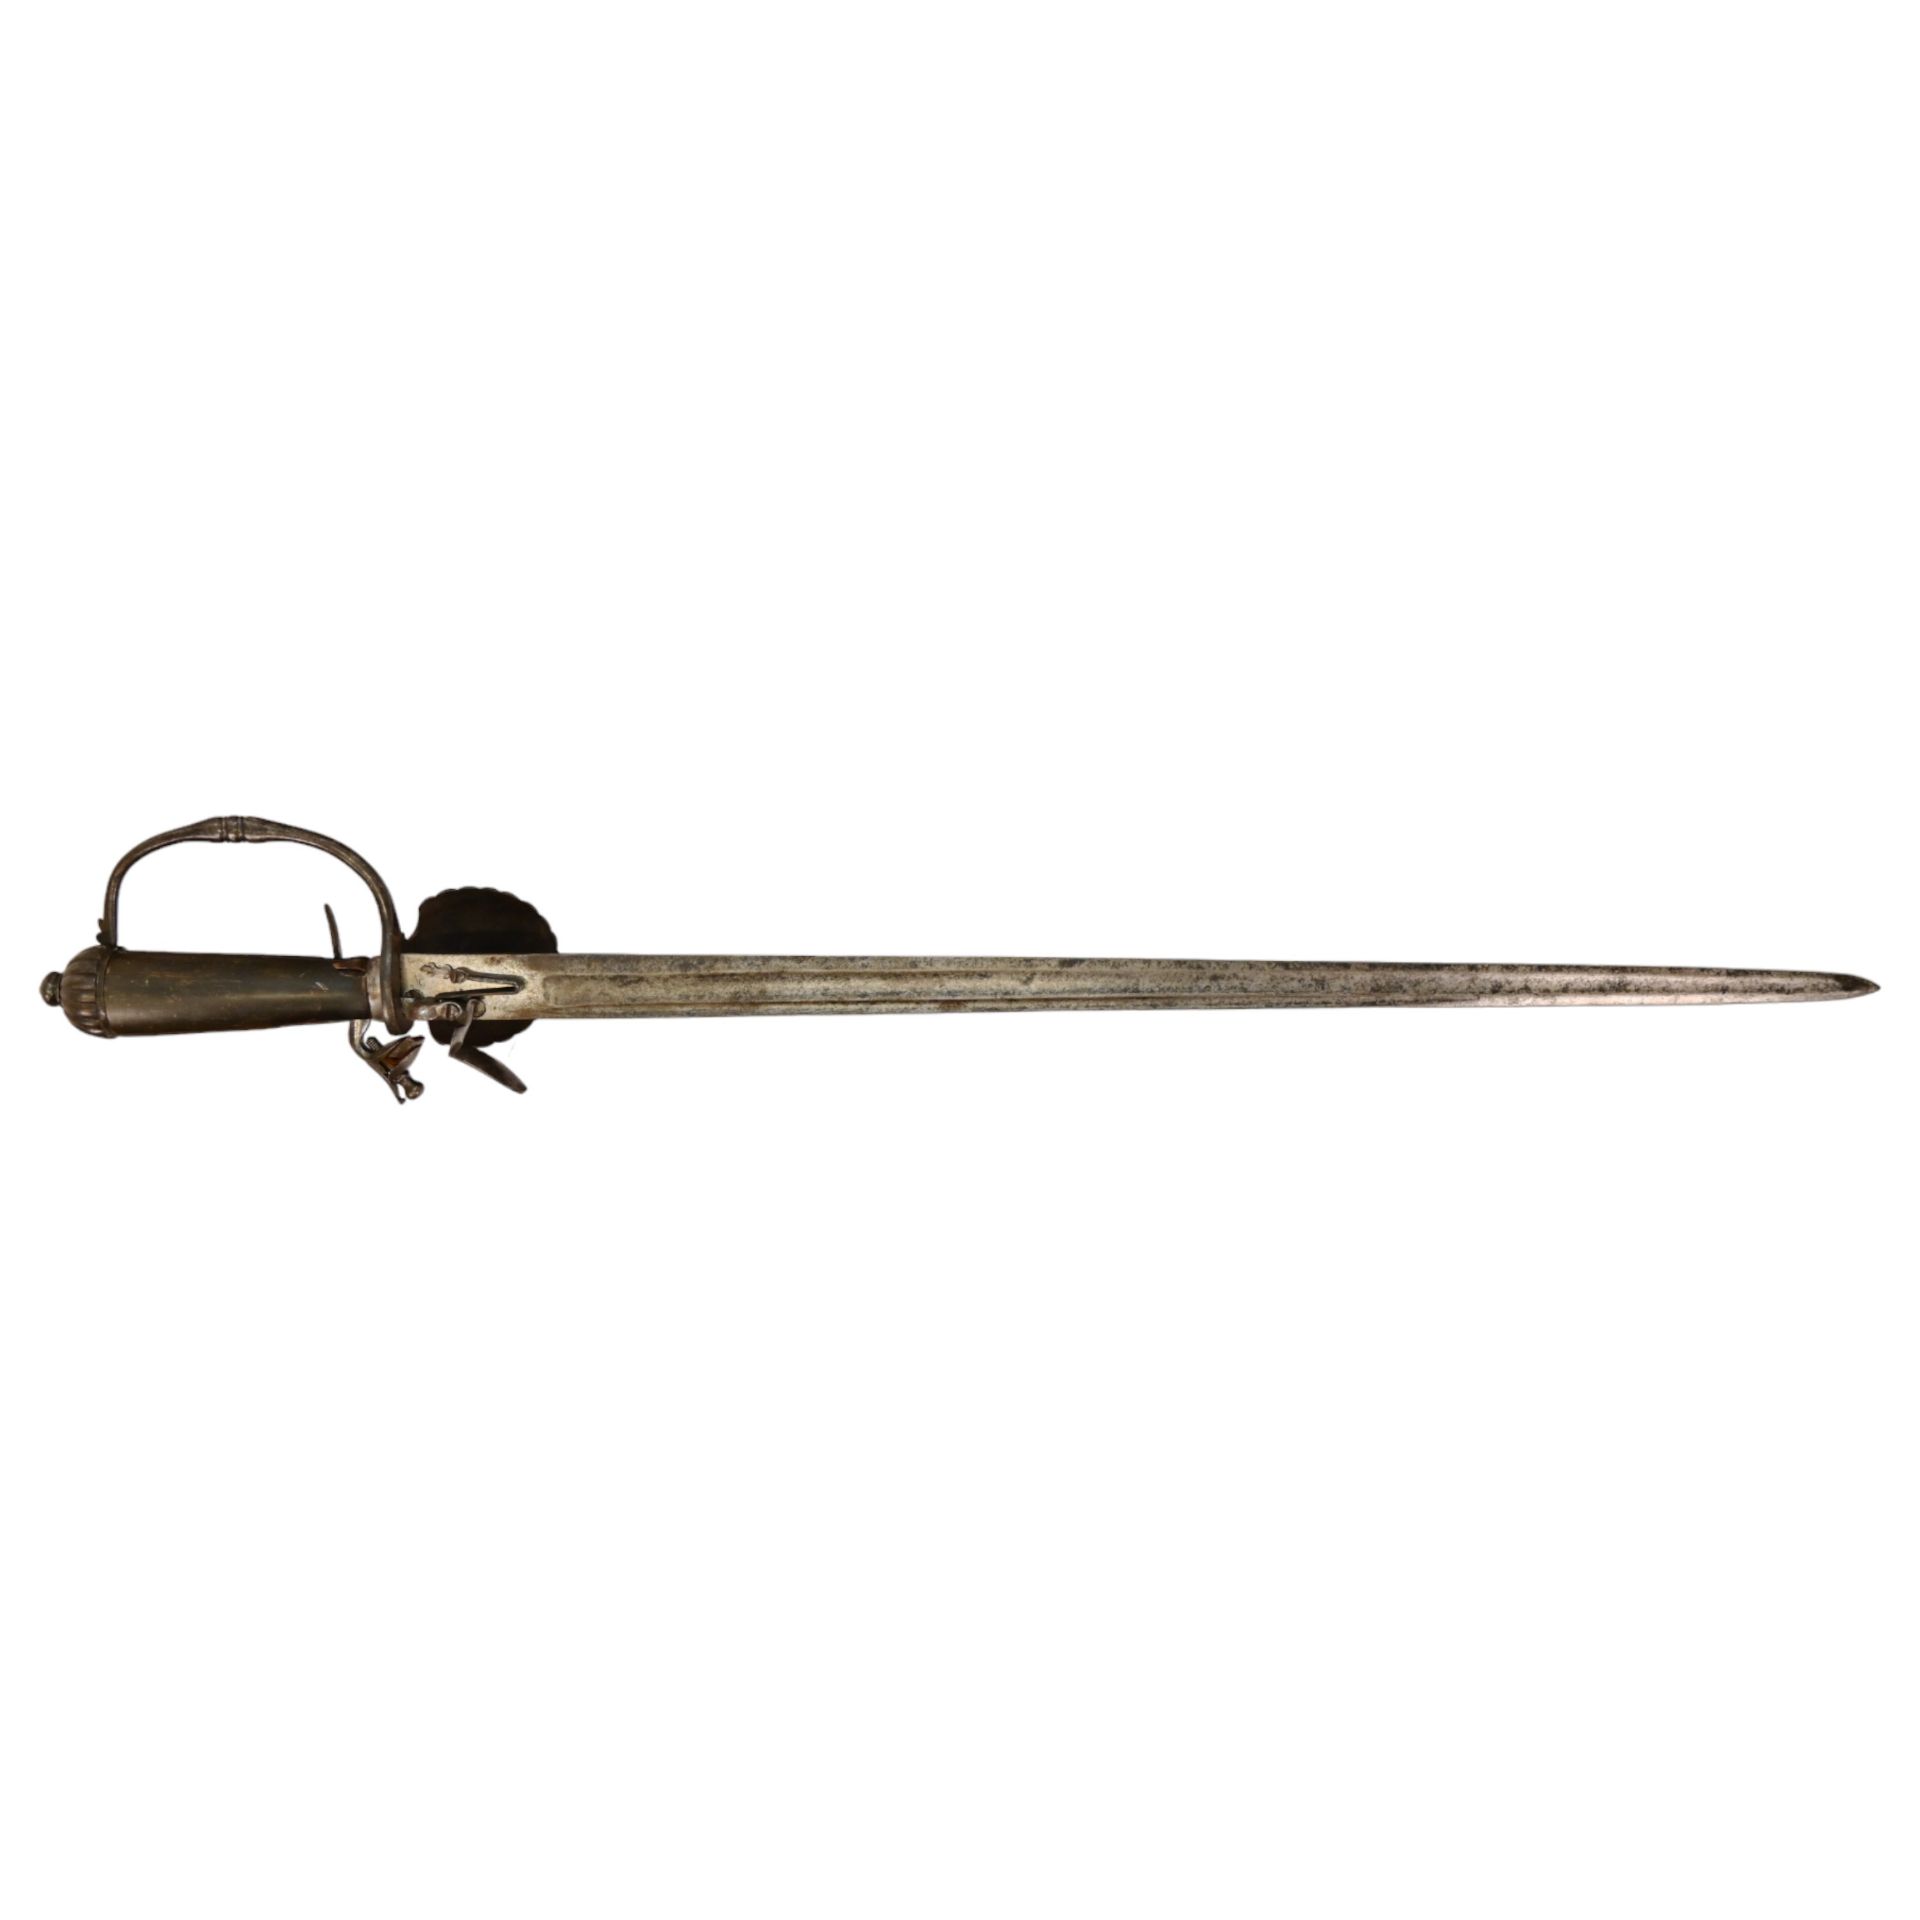 A FLINT LOCK HUNTING SWORD PISTOL WITH SHELL GUARD, IN THE ENGLISH TASTE, LAST HALF 18TH CENTURY. - Image 3 of 13